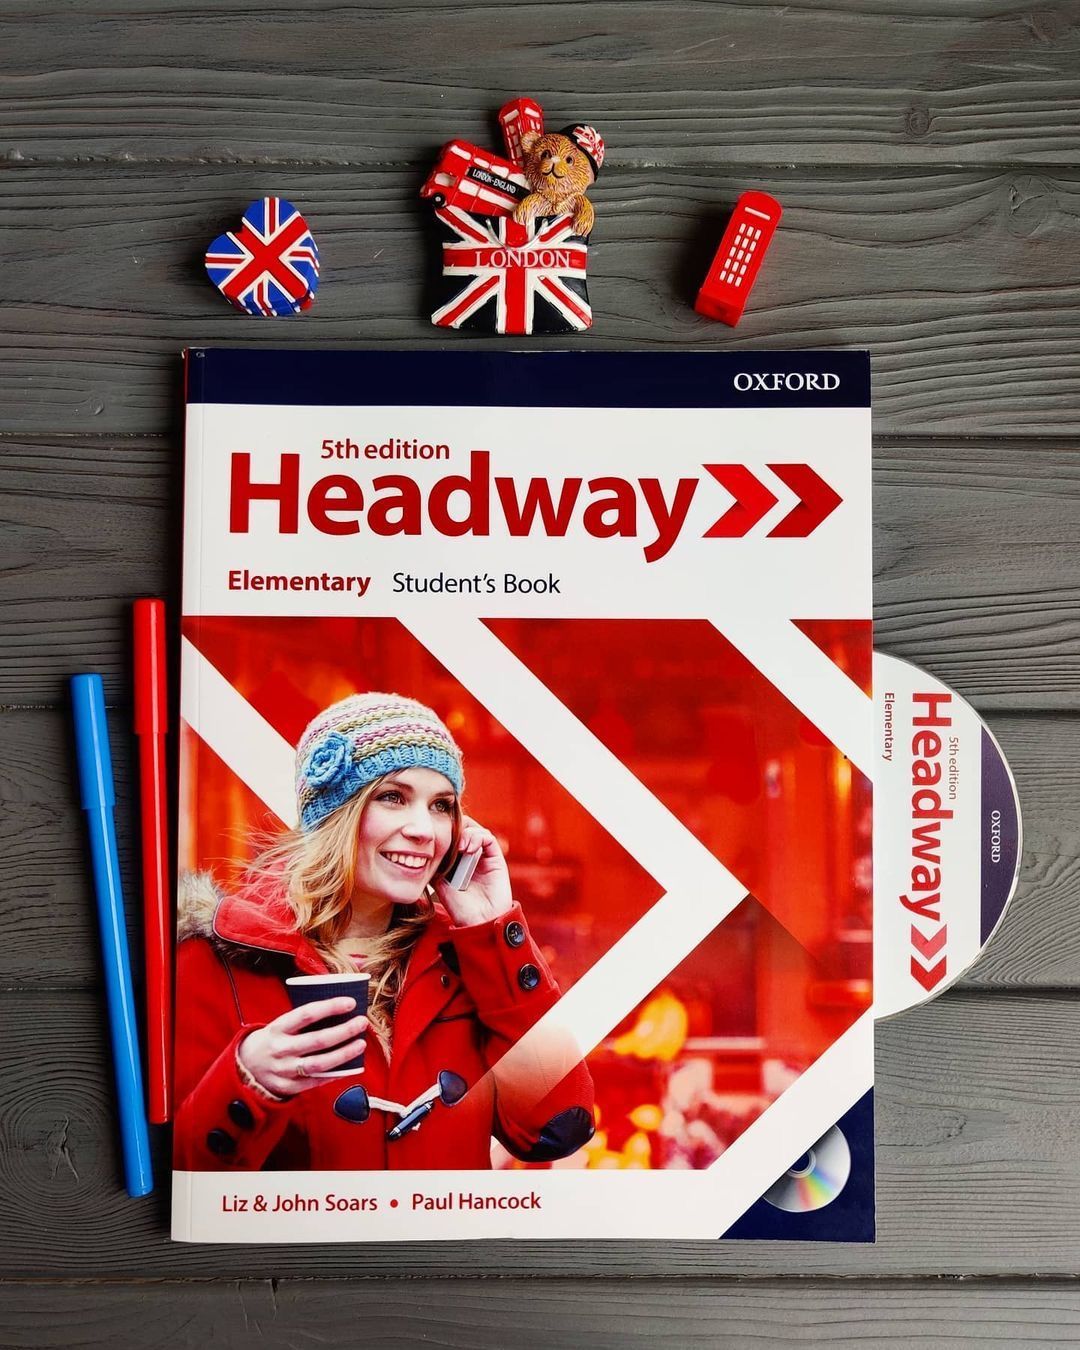 Headway Elementary 5th Edition. Book made Headway Elementary 5th Edition. New Headway Elementary 5th Edition Tests pdf. New headway 5th edition